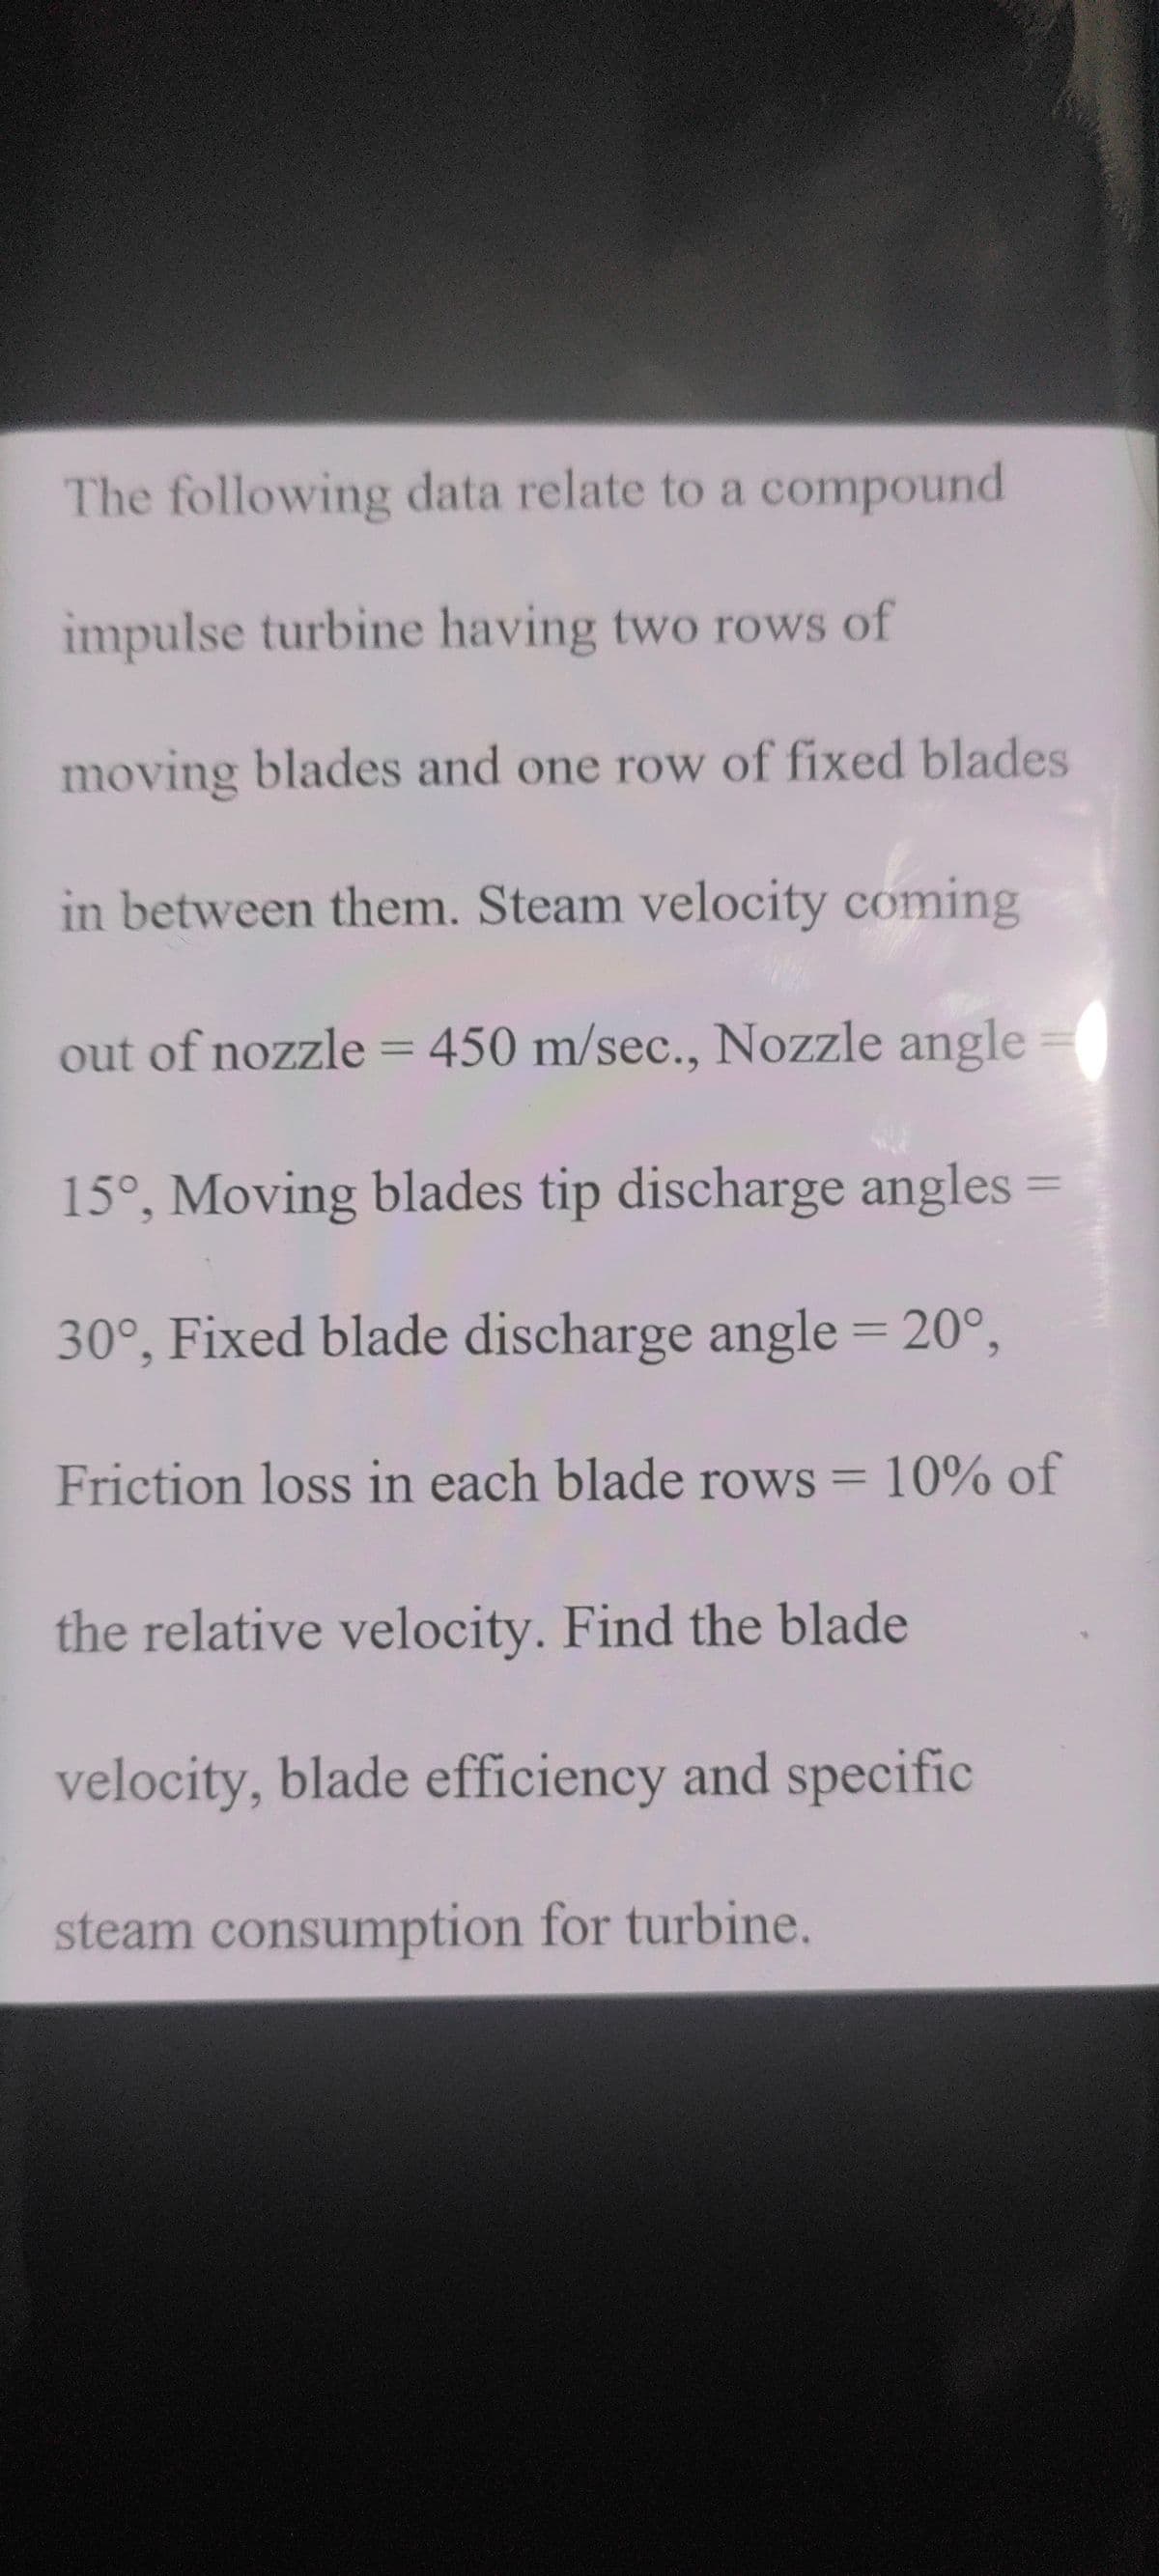 The following data relate to a compound
impulse turbine having two rows of
moving blades and one row of fixed blades
in between them. Steam velocity coming
out of nozzle= 450 m/sec., Nozzle angle
%3D
15°, Moving blades tip discharge angles
%3D
30°, Fixed blade discharge angle = 20°,
6.
Friction loss in each blade rows = 10% of
%3D
the relative velocity. Find the blade
velocity, blade efficiency and specific
steam consumption for turbine.
